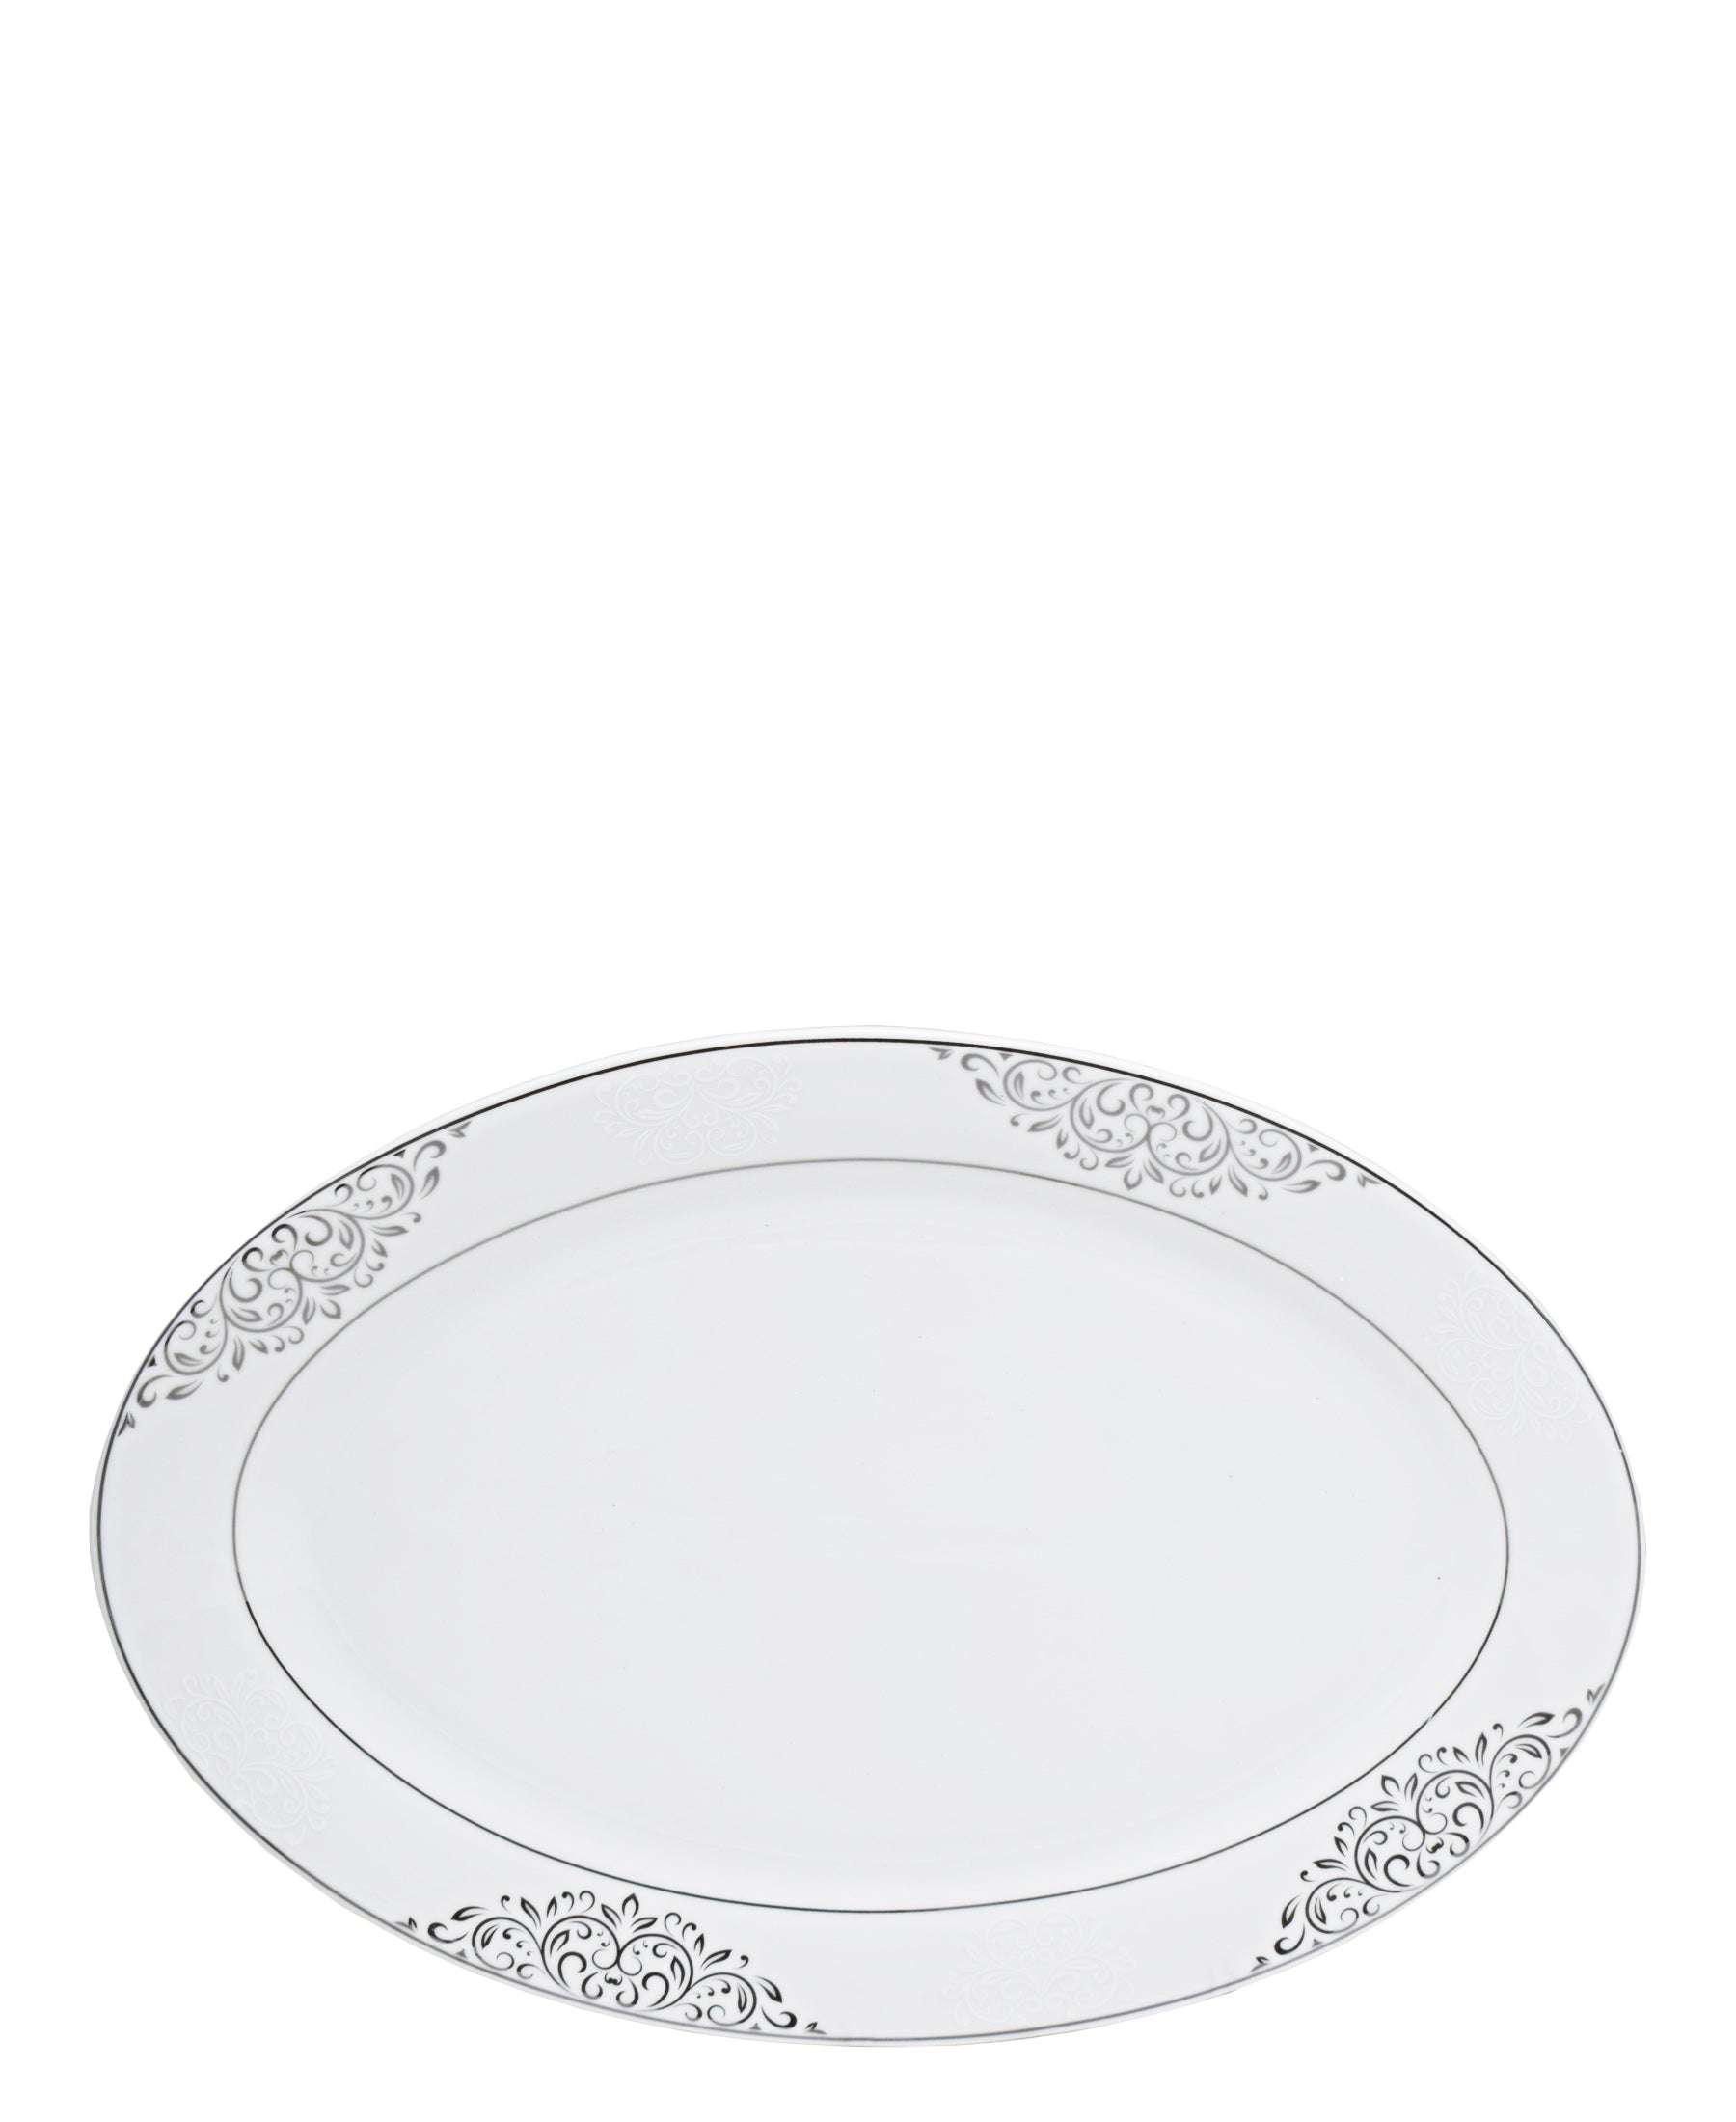 Table Pride 47 Piece Dinner Set - White With Black Floral Print